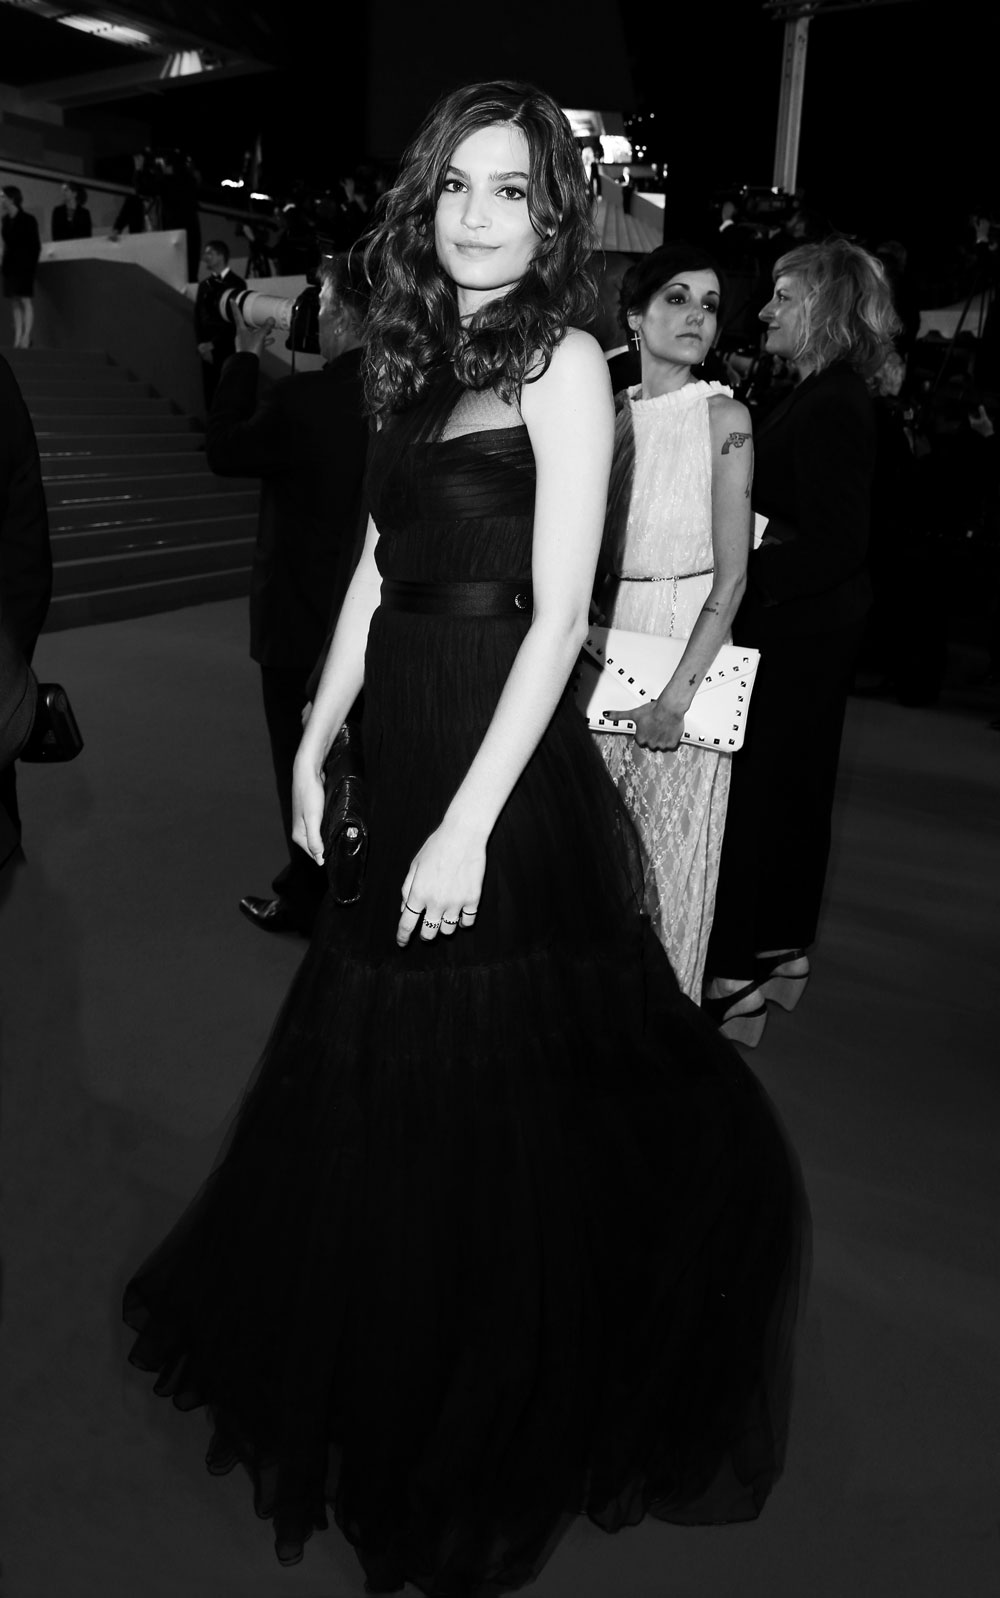 CANNES : SHARPEST LOOK OF THE DAY / ALMA JODOROWSKY WEARING A CHANEL HAUTE COUTURE DRESS